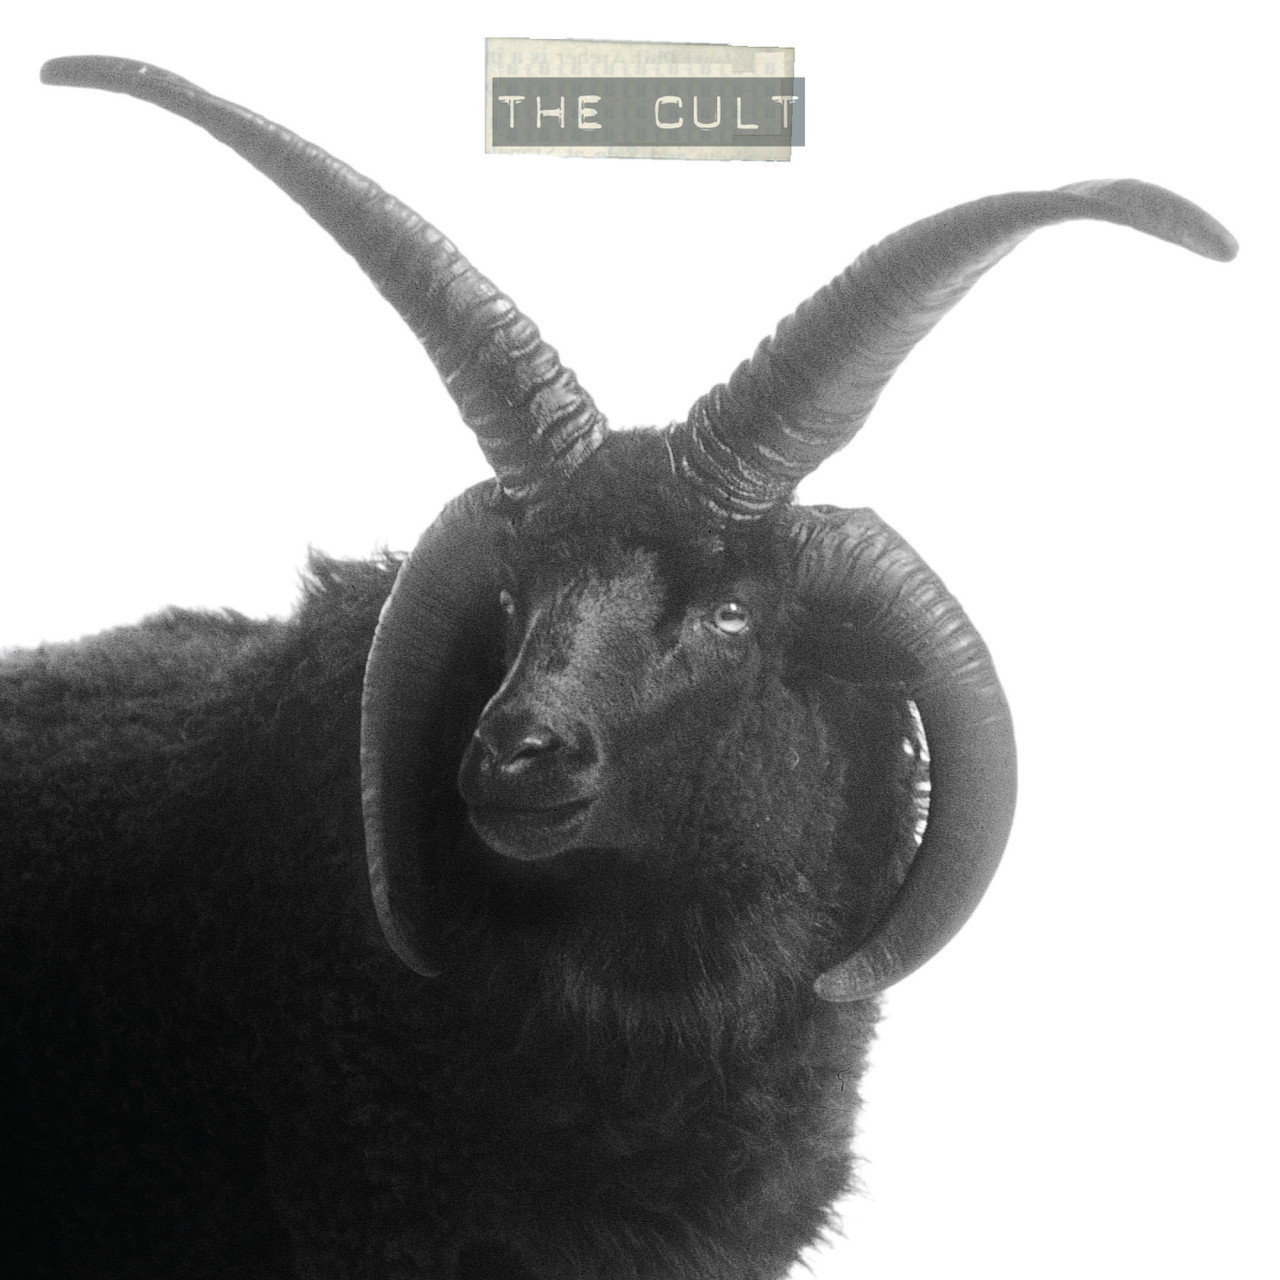 The Cult by The Cult